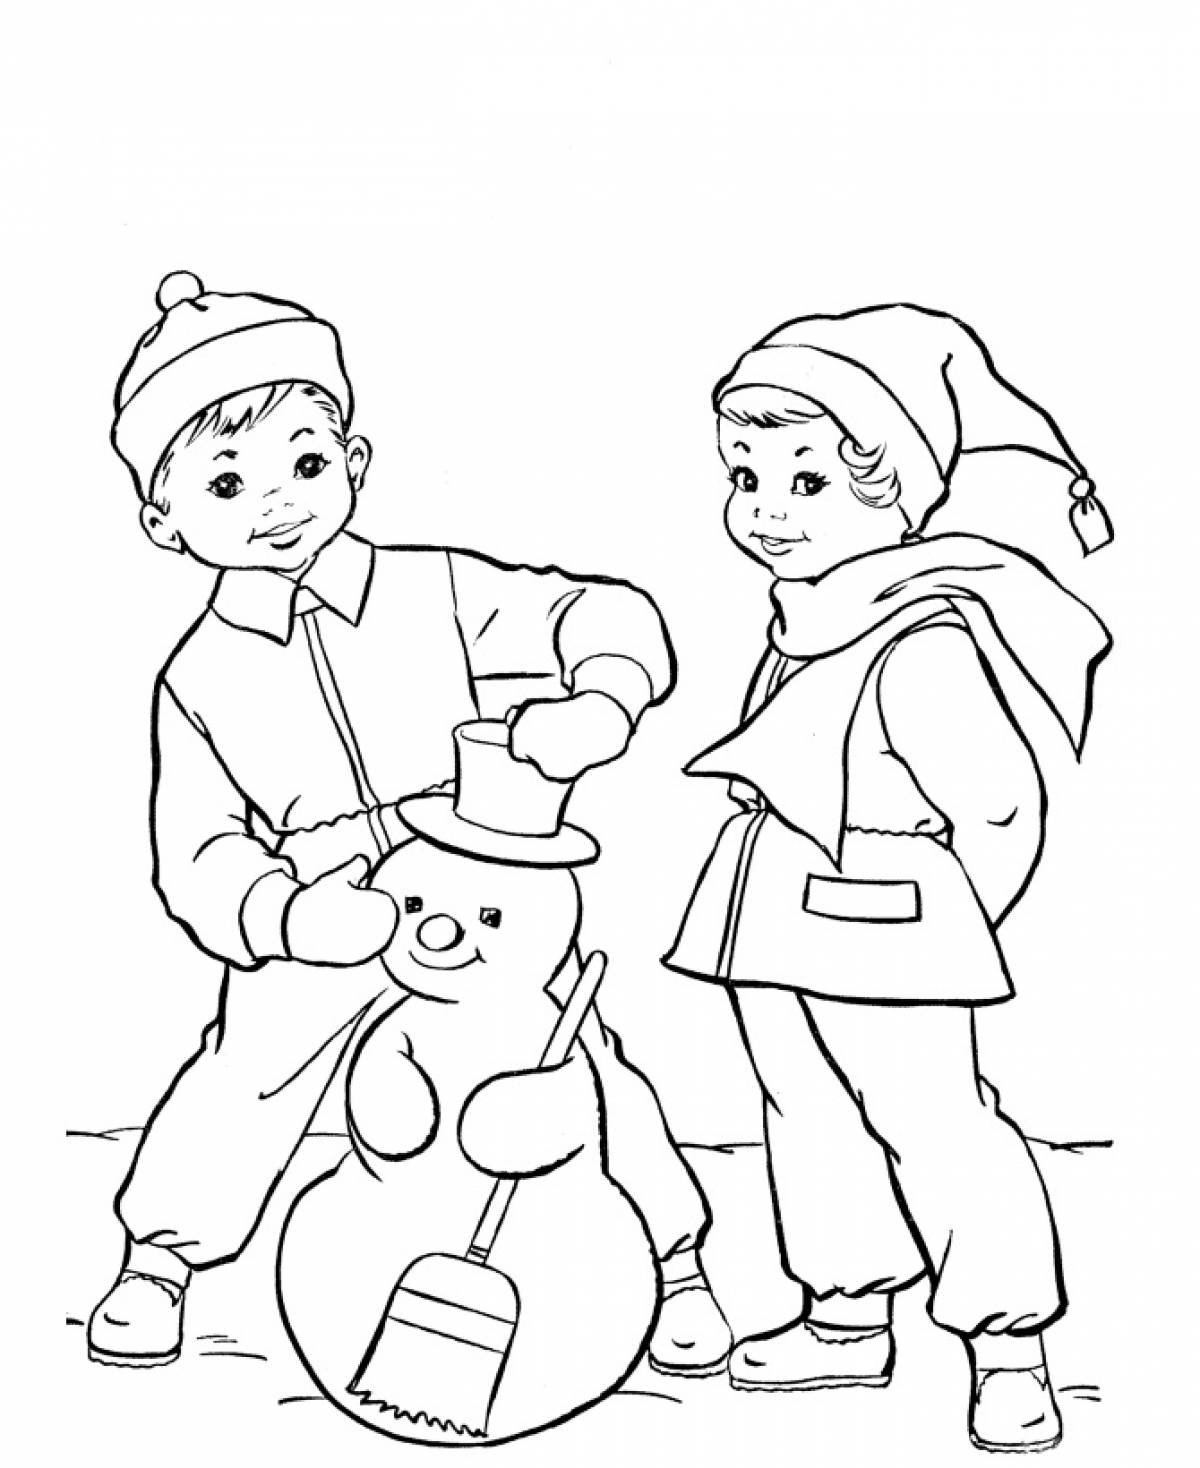 Boy and girl making a snowman